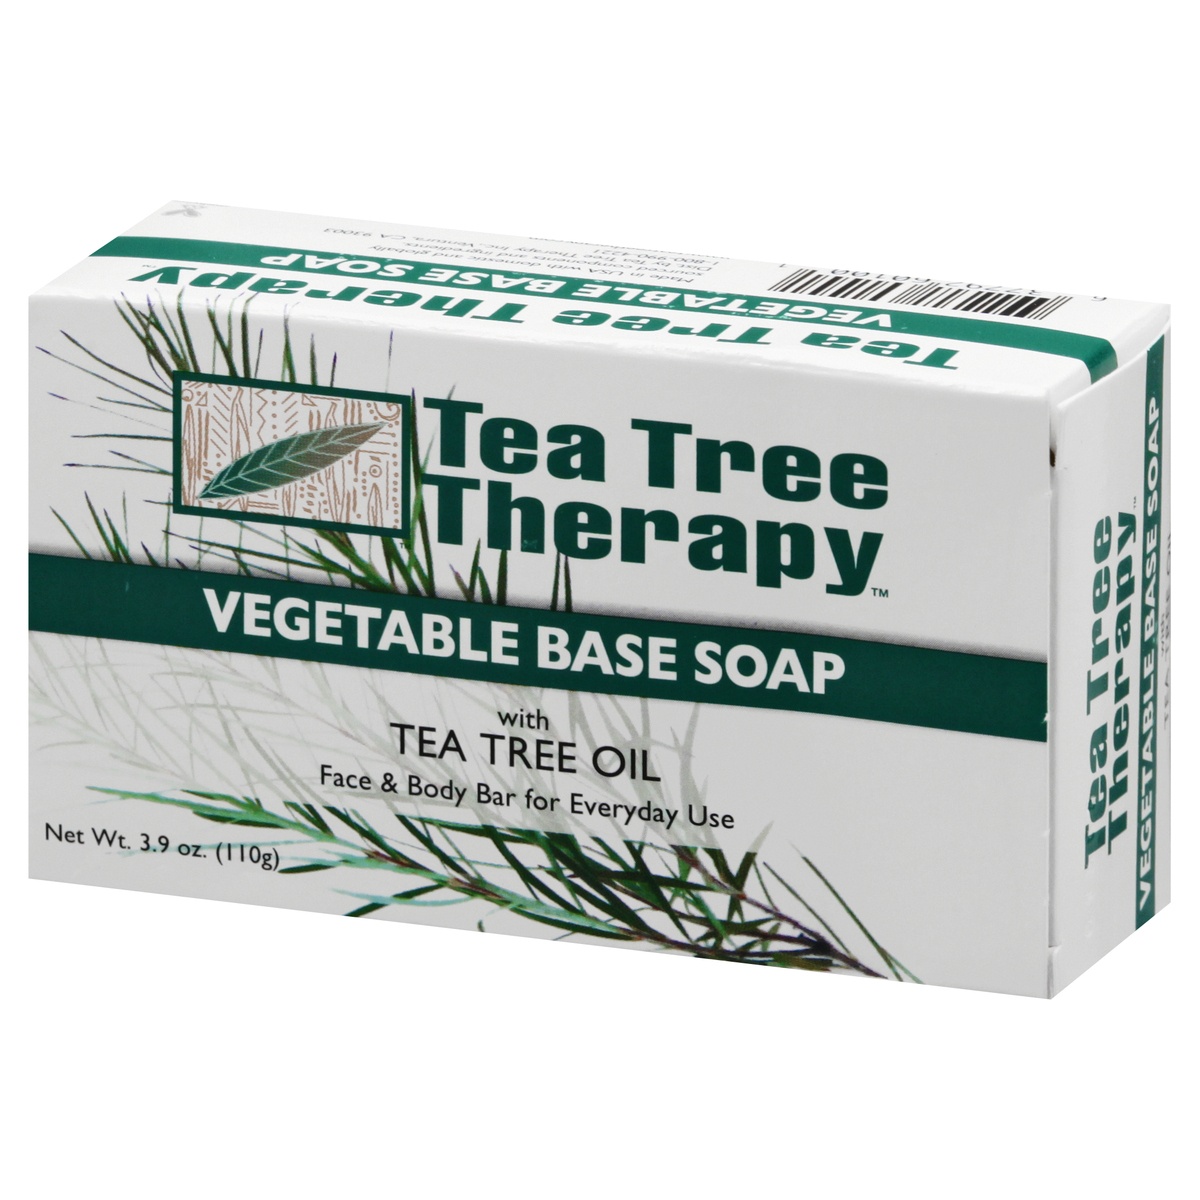 slide 3 of 9, Tea Tree Therapy Vegetable Base Soap with Tea Tree Oil, 3.9 oz